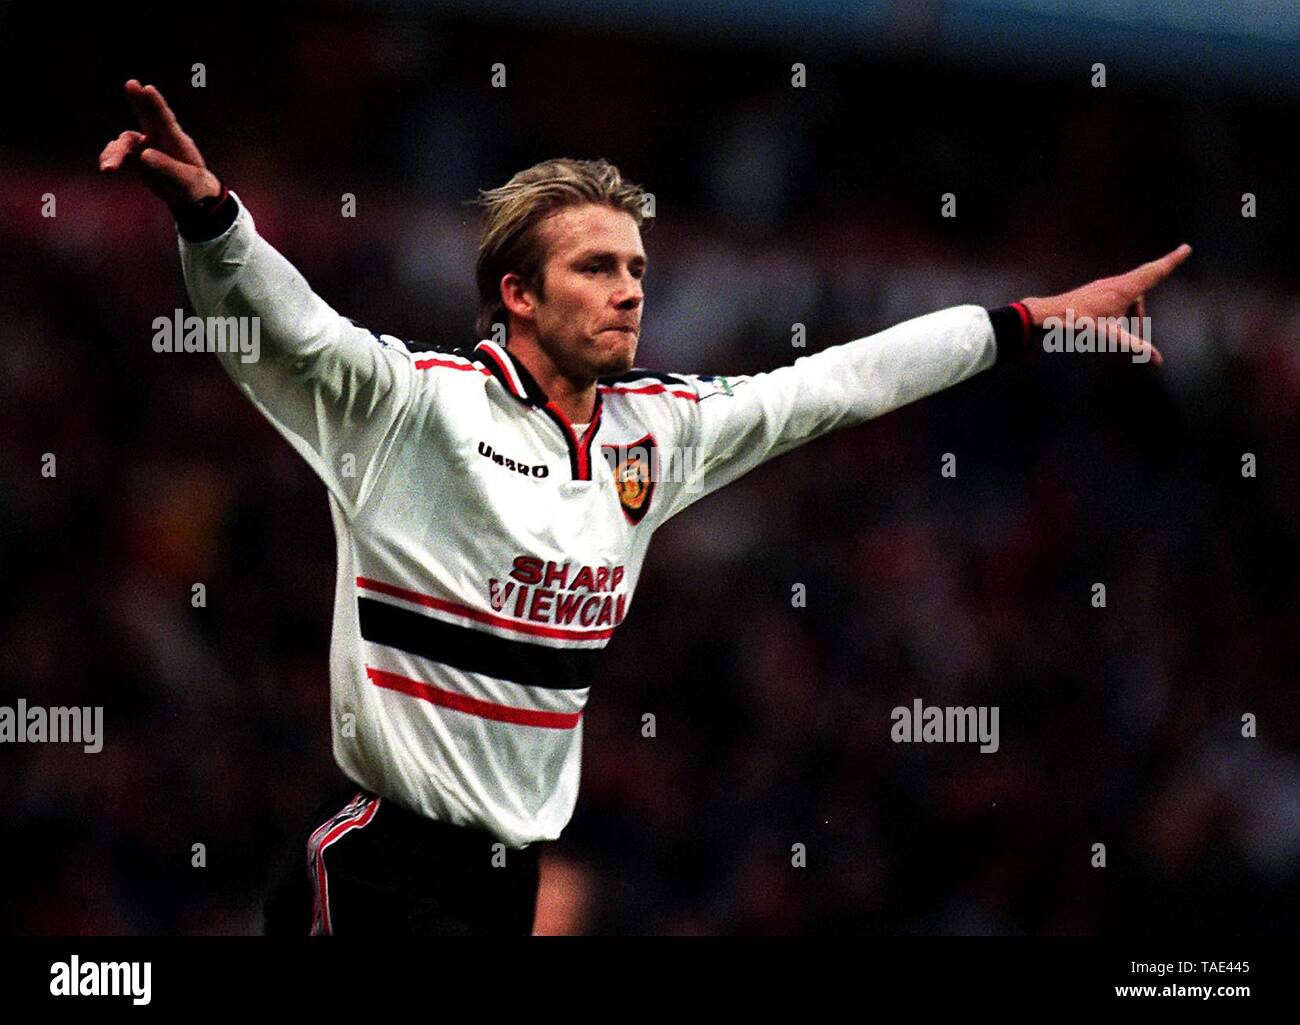 File photo dated 14-04-1999 of Manchester United's David Beckham celebrates  after scoring against Arsenal at Villa Park in the FA Cup semi-final replay  Stock Photo - Alamy